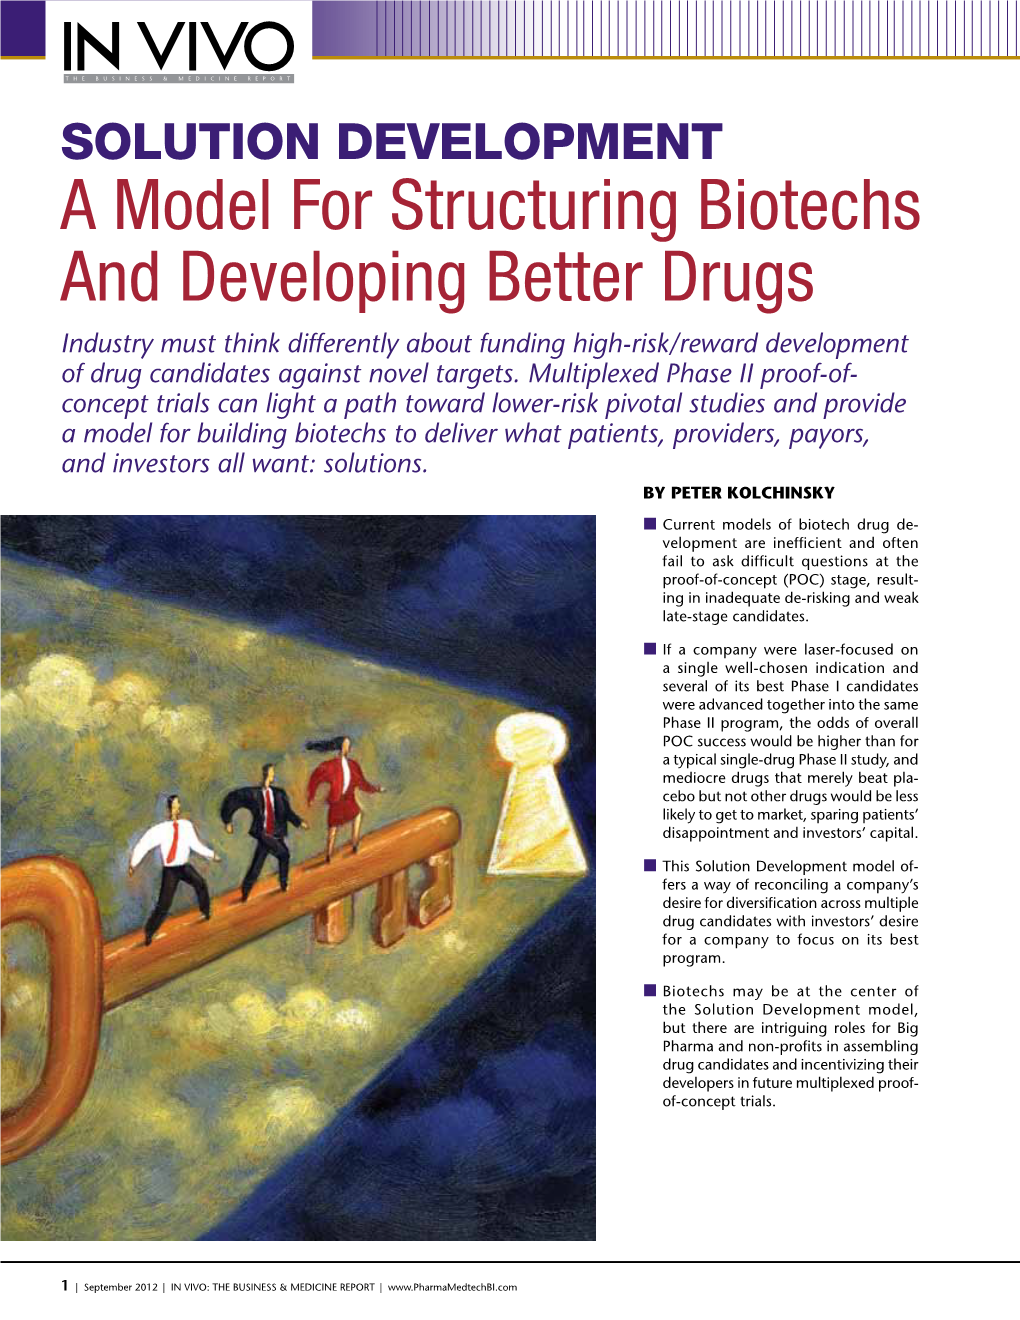 A Model for Structuring Biotechs and Developing Better Drugs